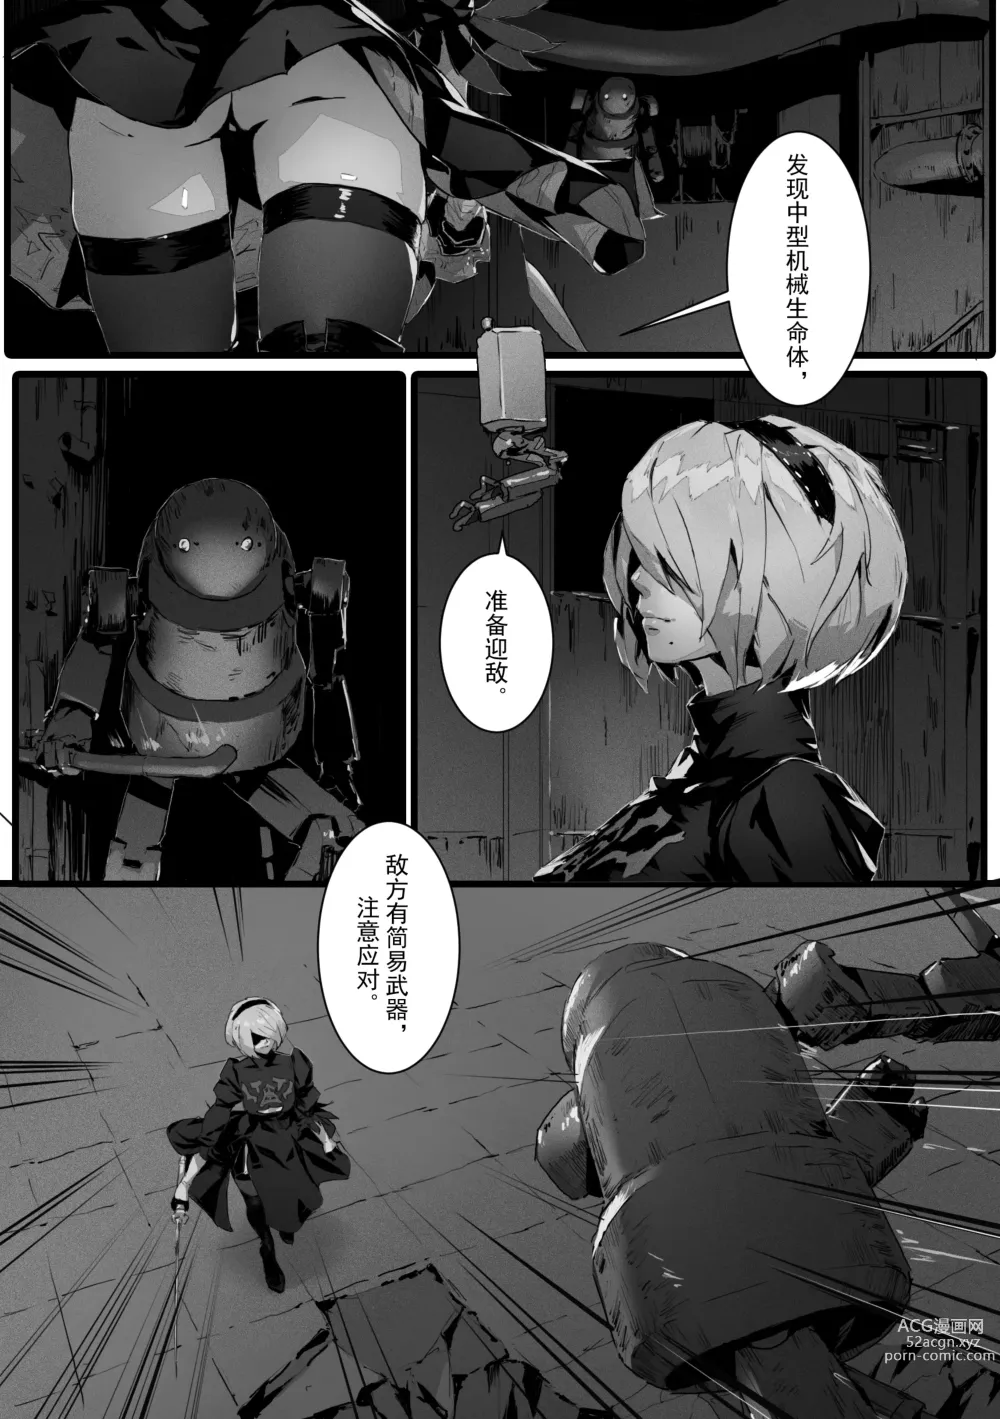 Page 2 of doujinshi 2B In Trouble Part 1-6